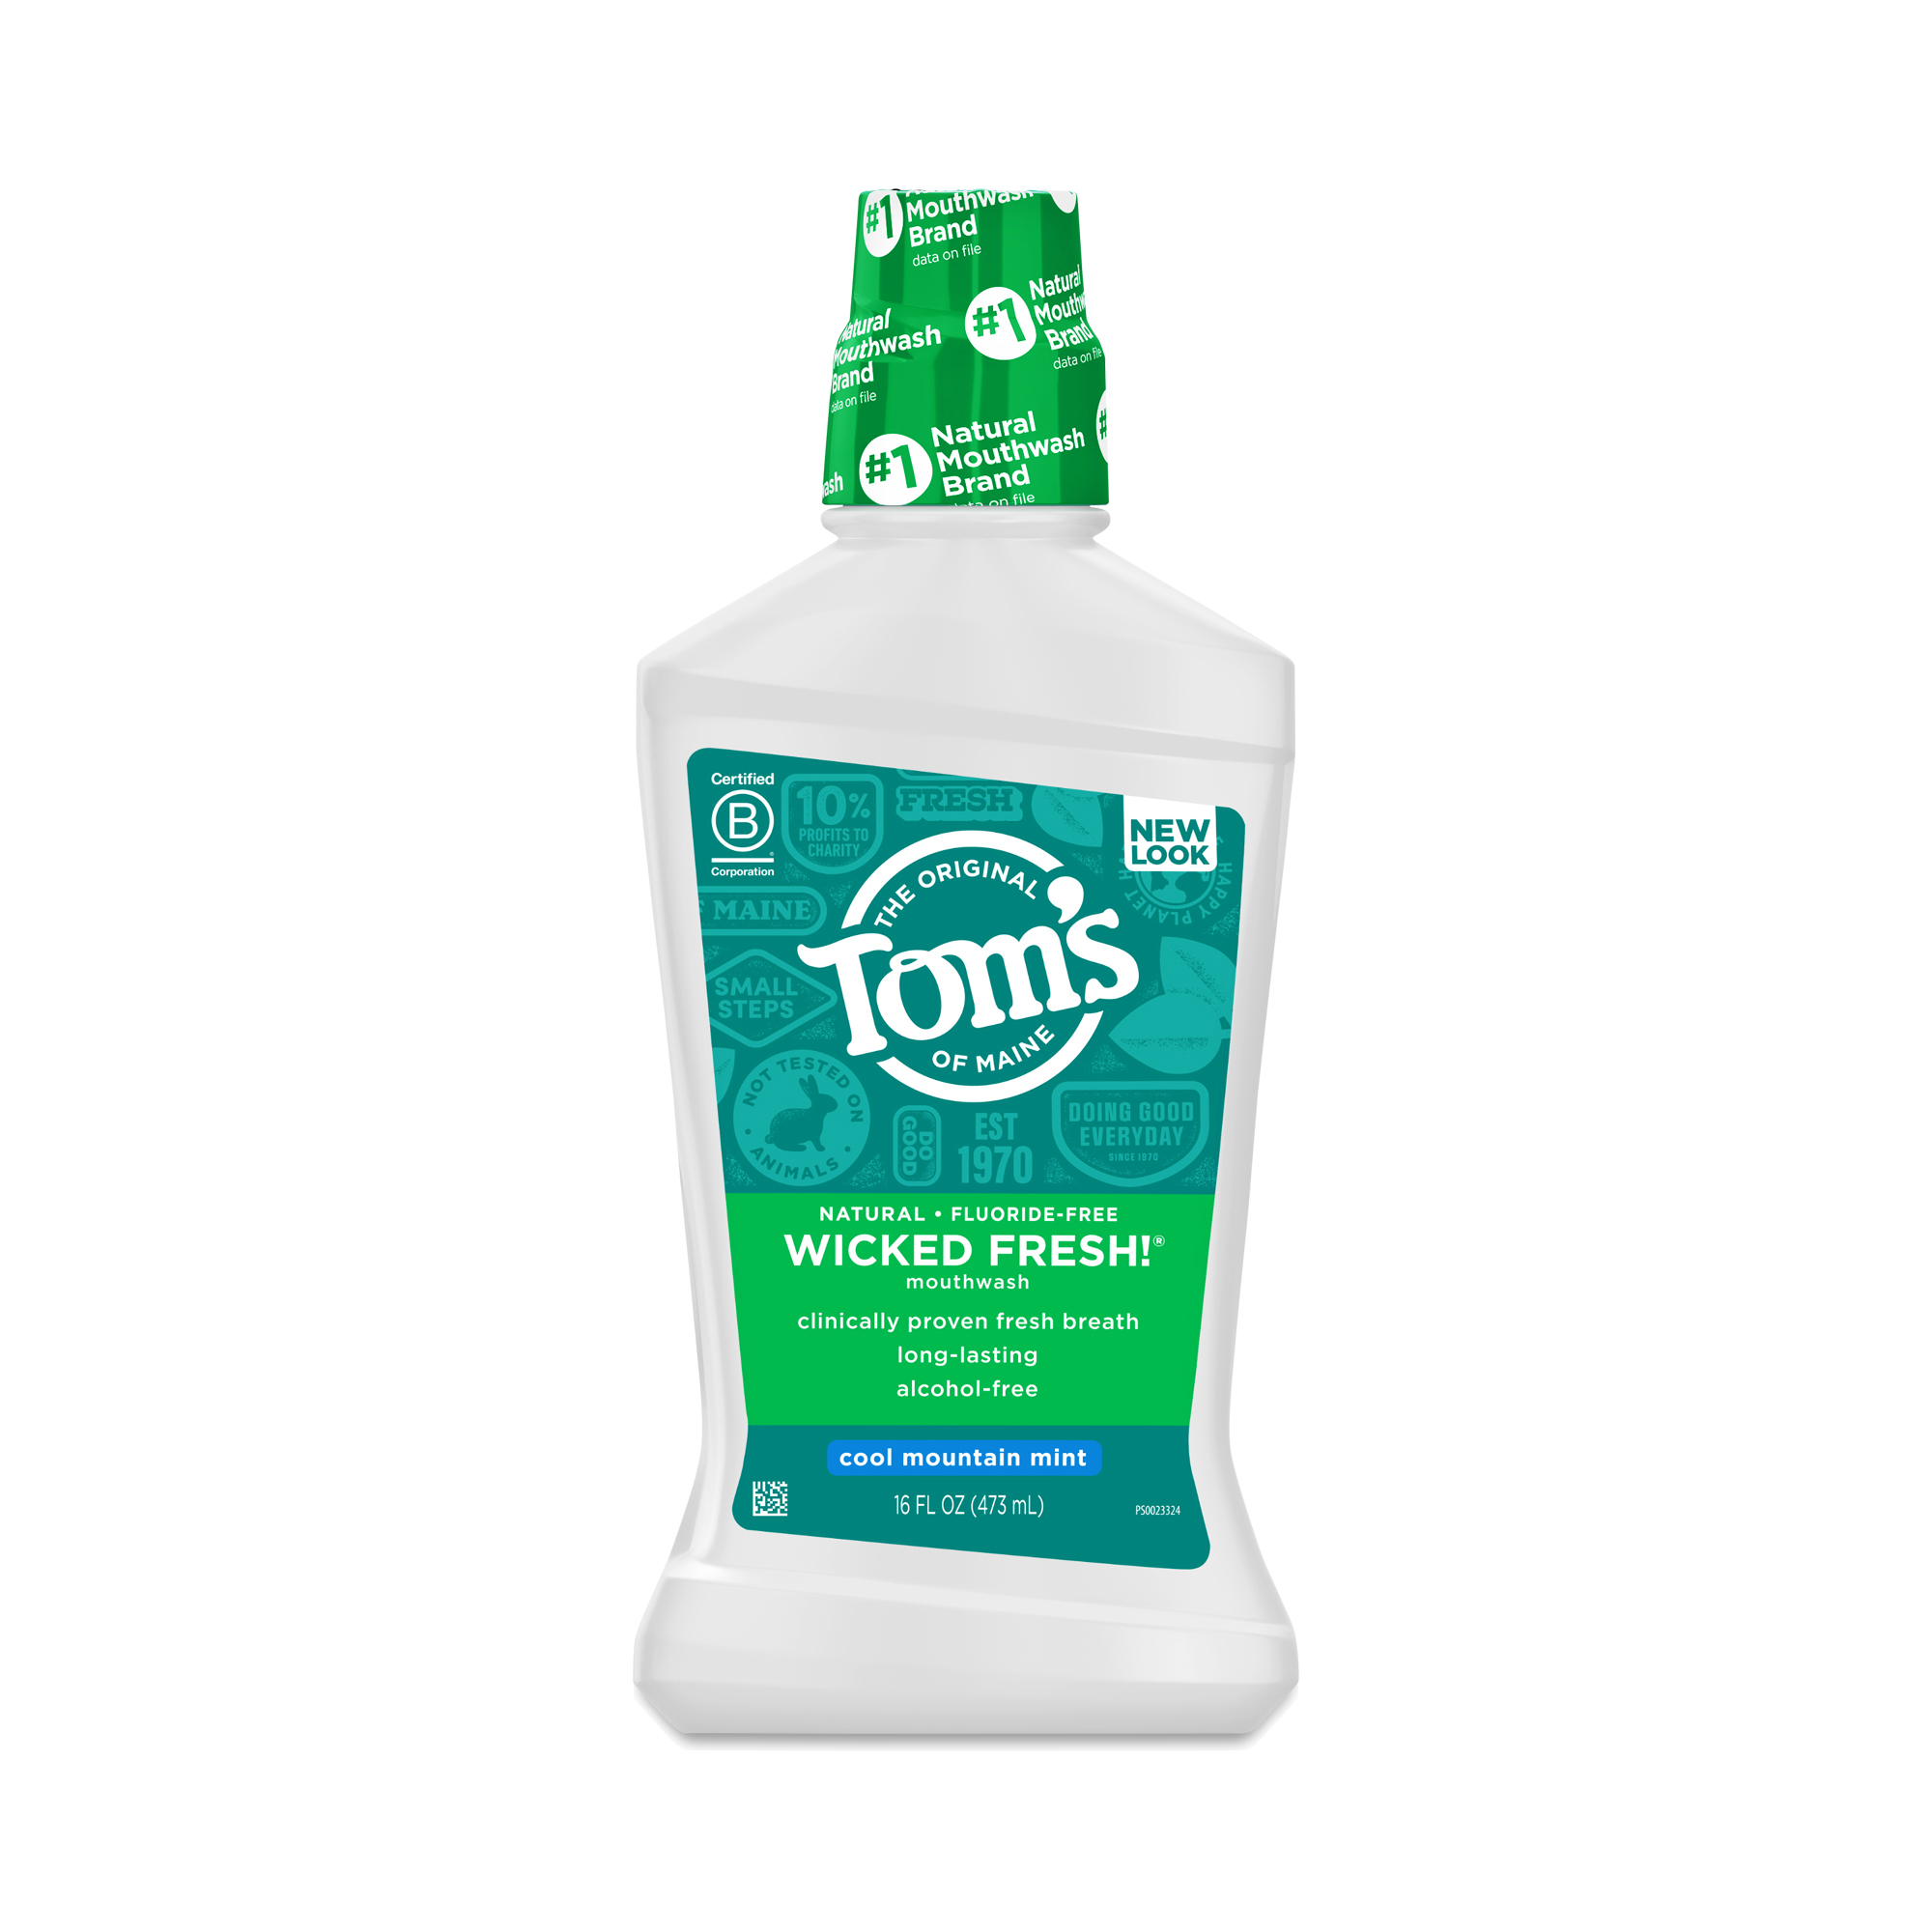 Tom's of Maine Wicked Fresh Mouthwash, Cool Mountain Mint 16 oz bottle